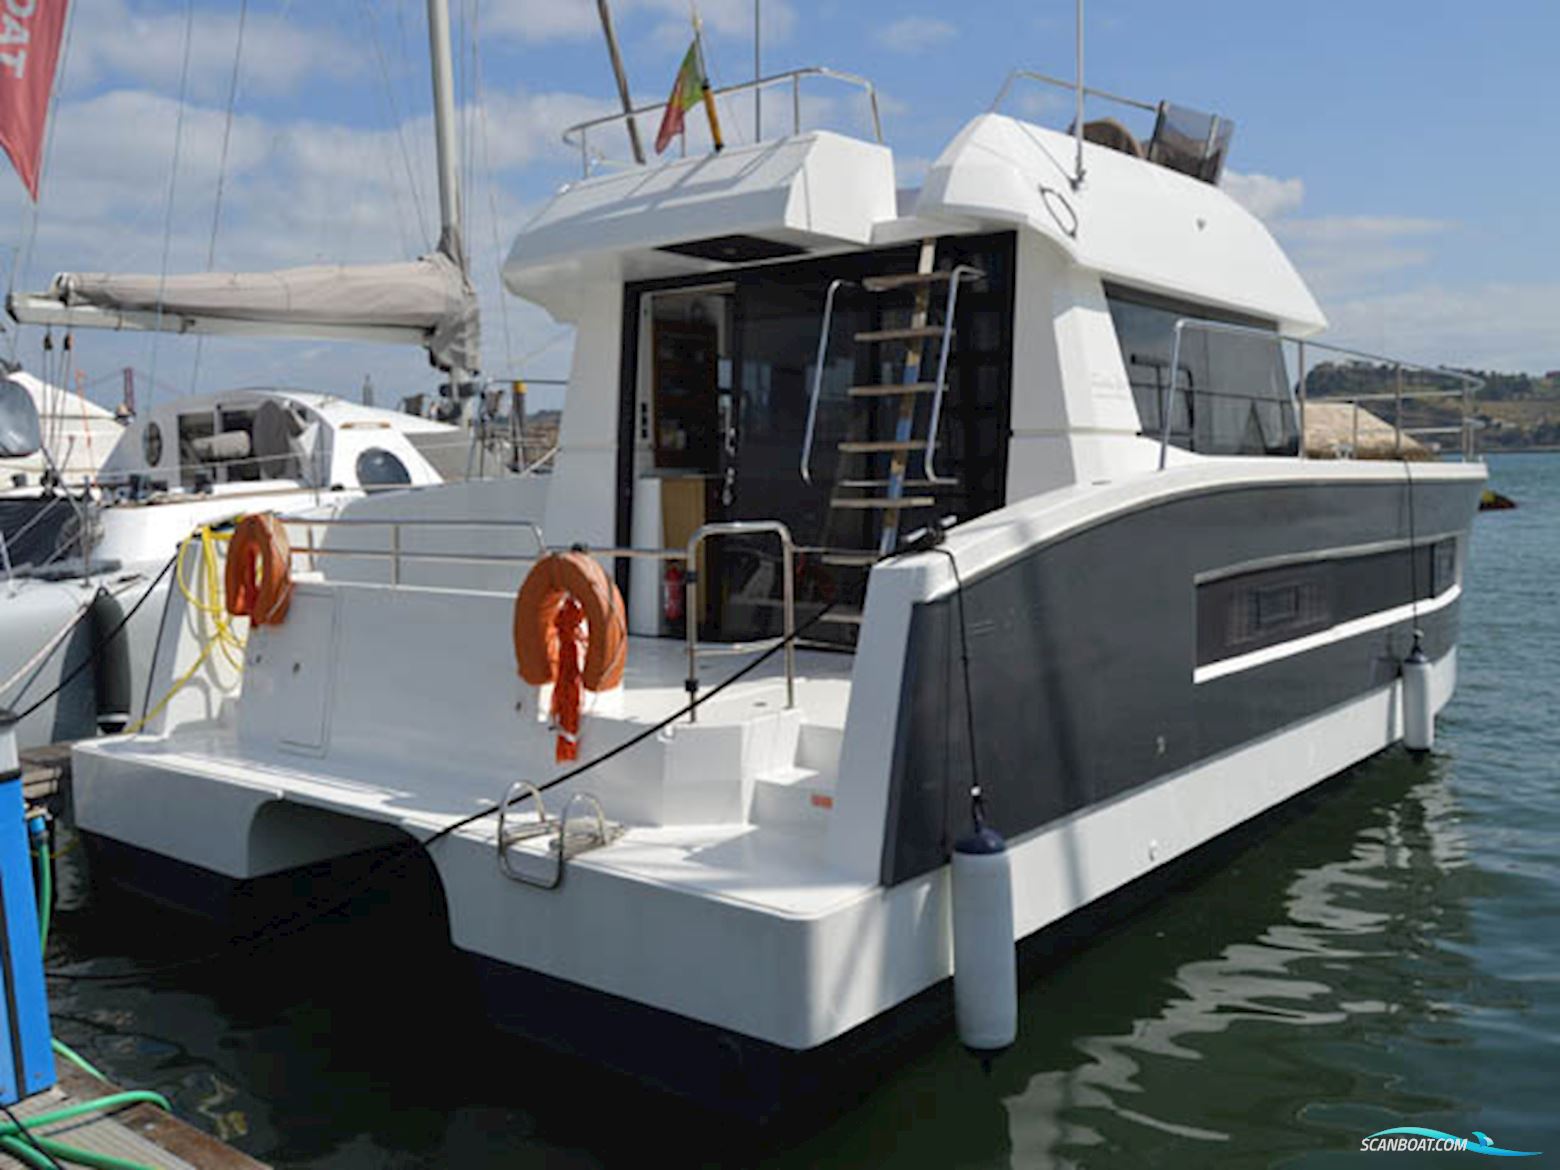 Fountaine Pajot MY 37 Multi hull boat 2017, with Volvo Penta D3-220 engine, Portugal